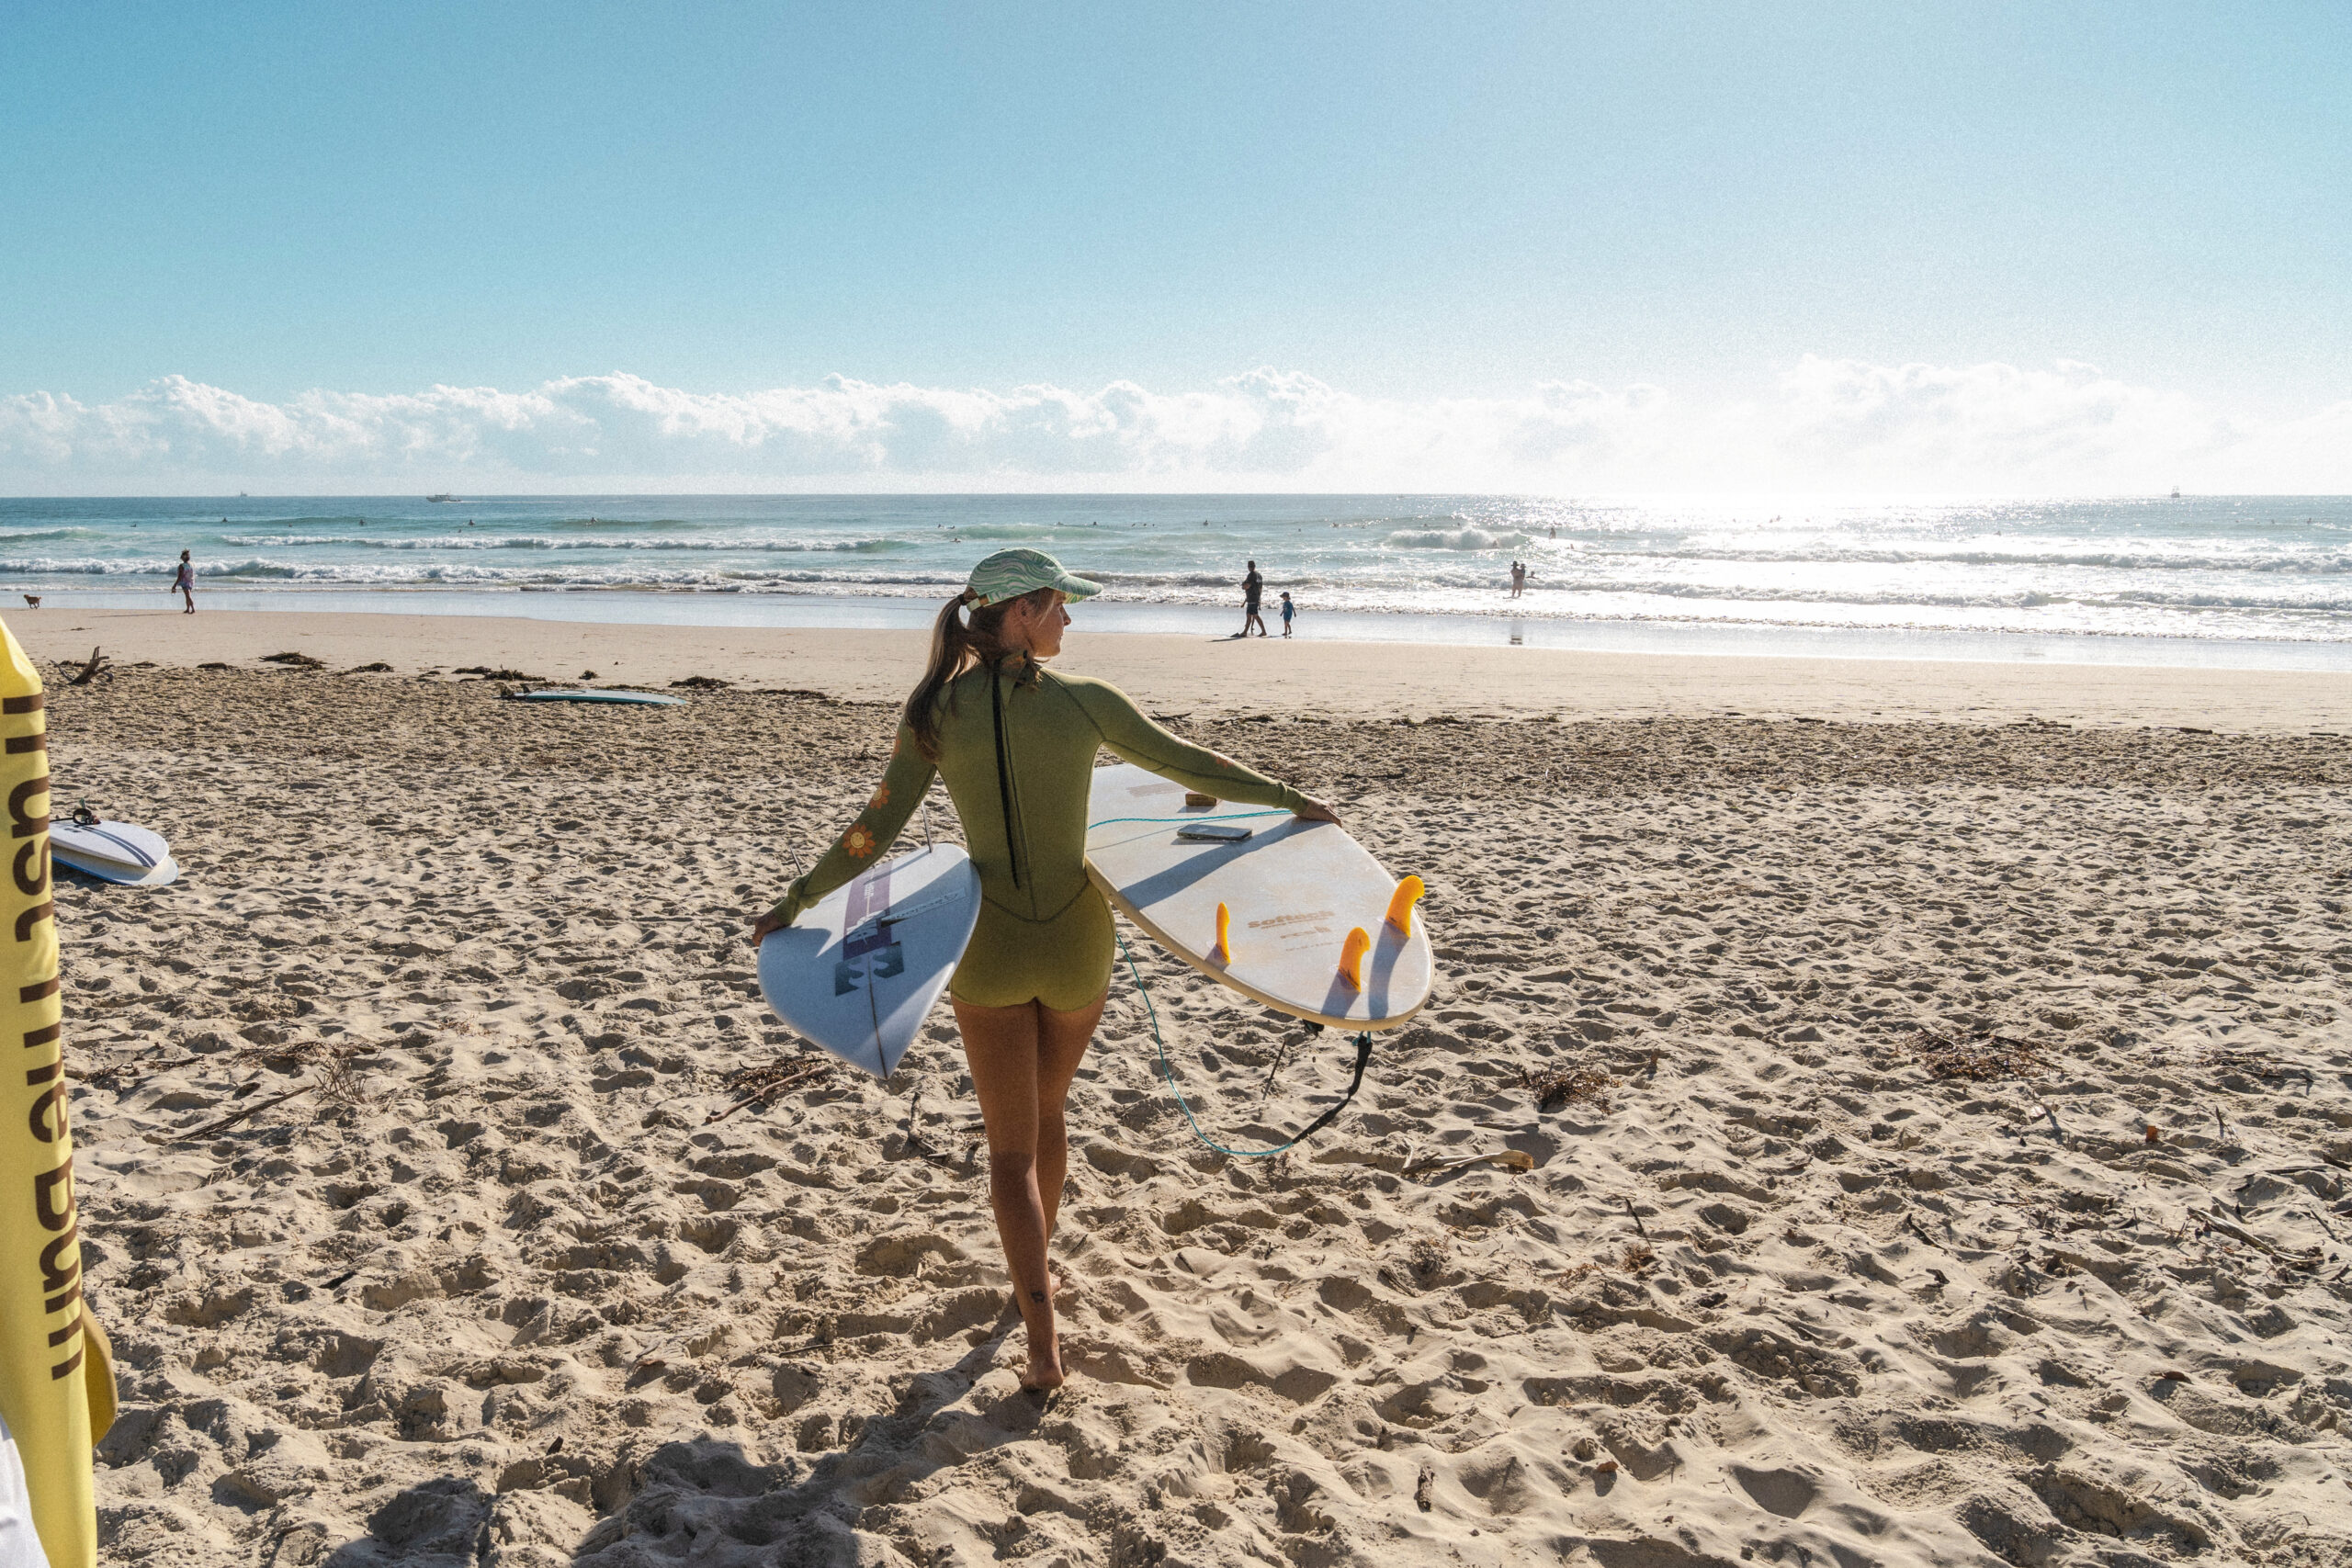 Woman walking toward the water with a surfboard in hand